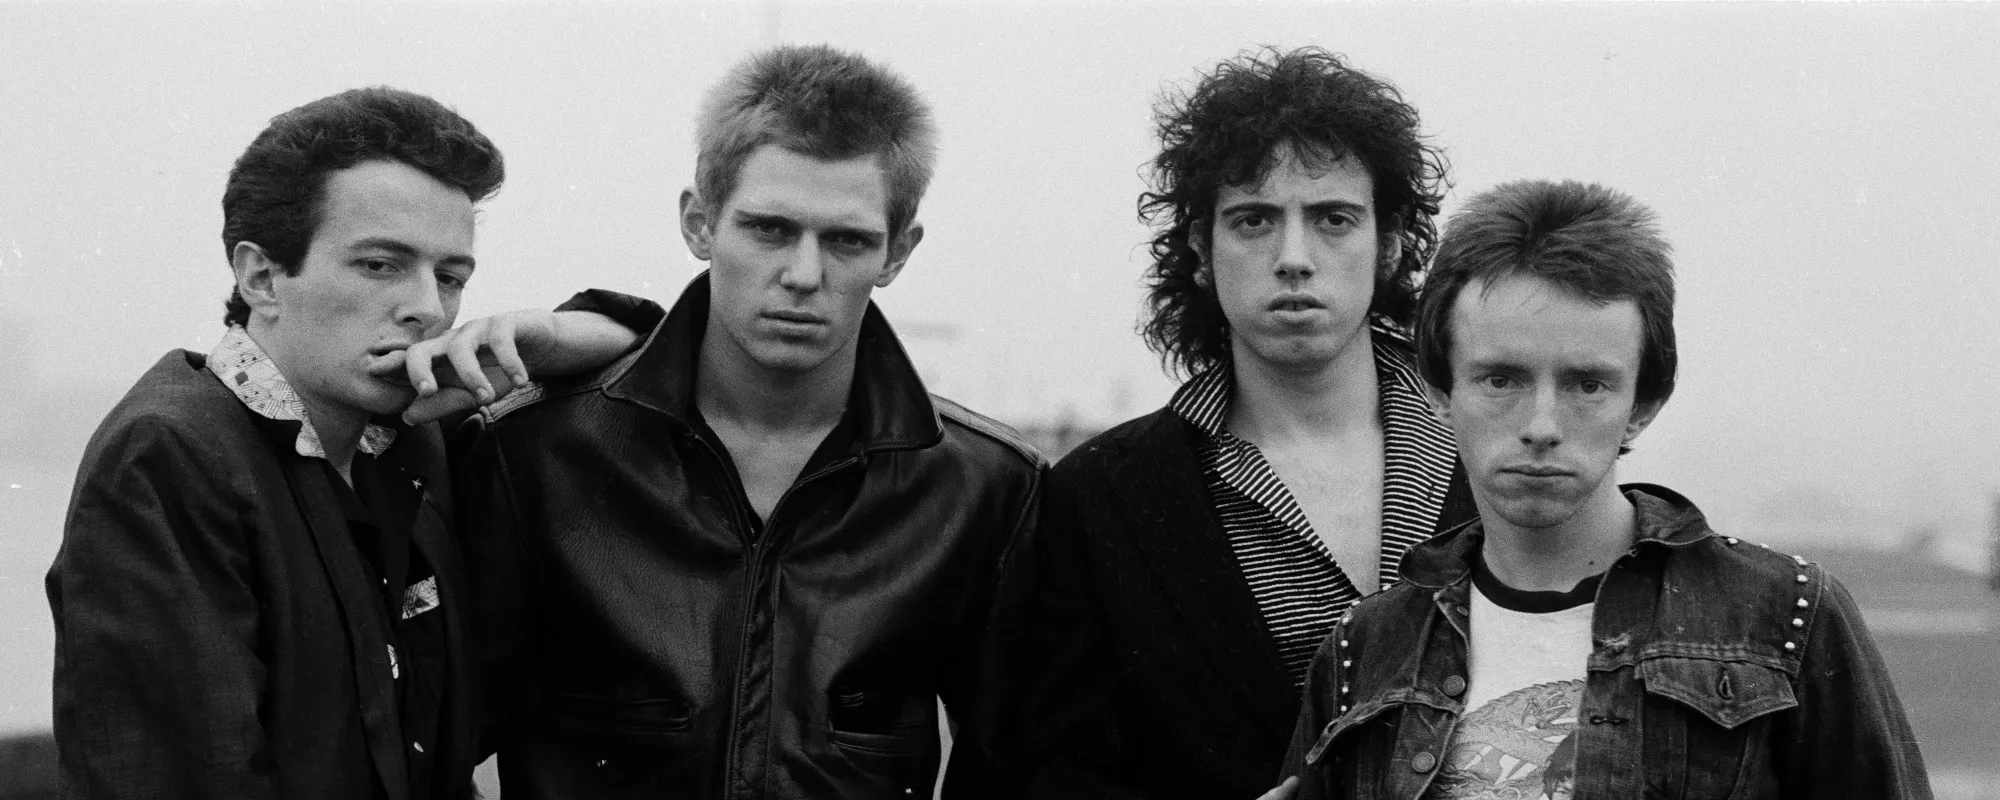 The Activist Meaning Behind the Band Name The Clash